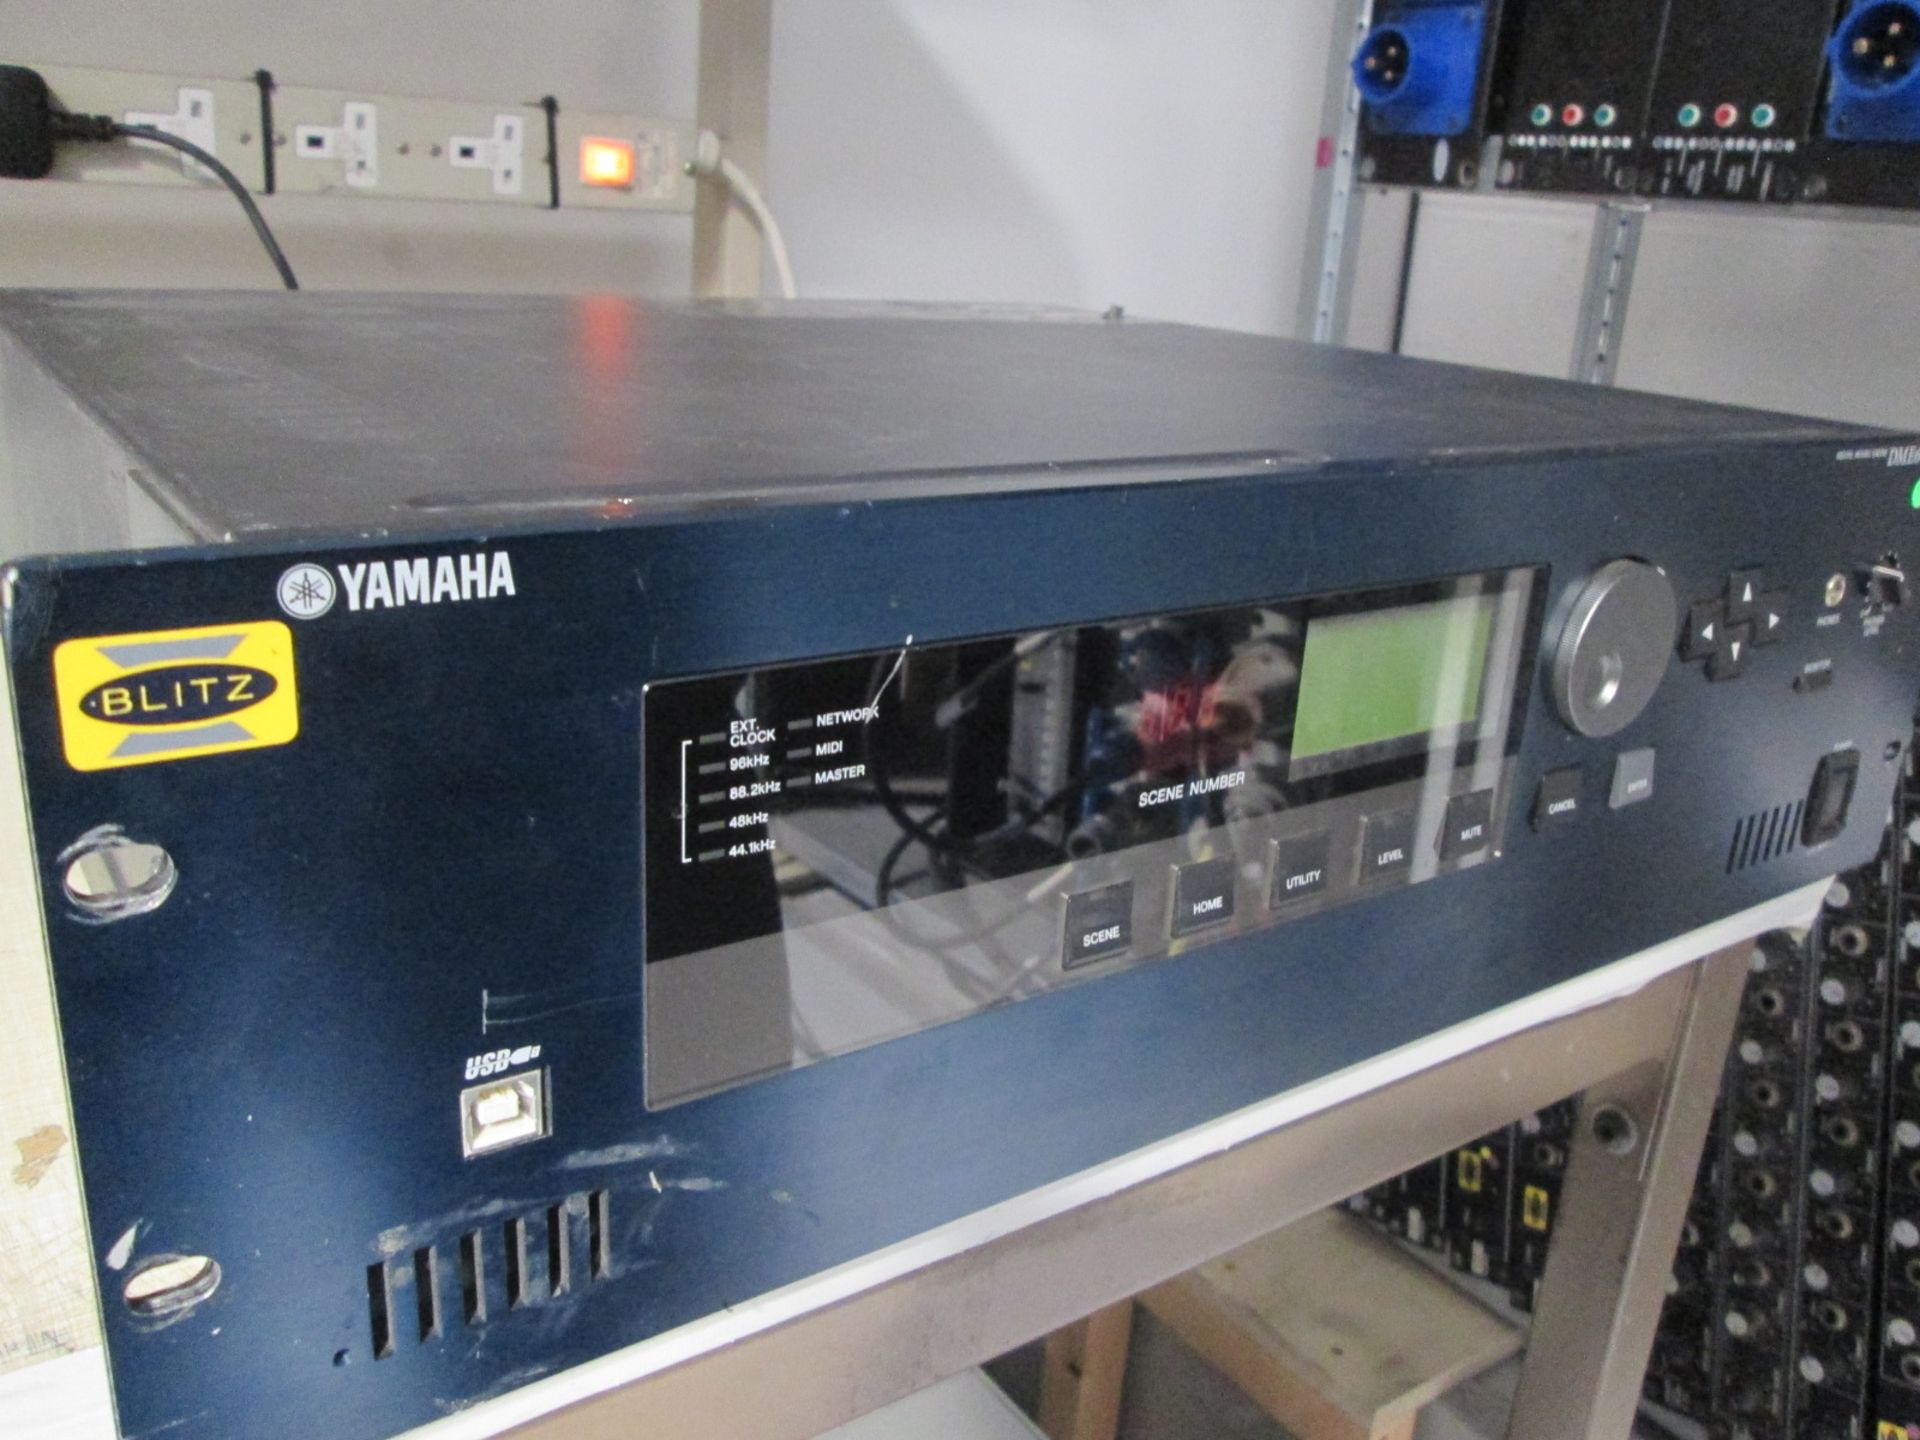 Yamaha DME64N Digital Mixing Engine with Spare Cards, Includes Yamaha DA 824 DA Conveter - Image 2 of 11